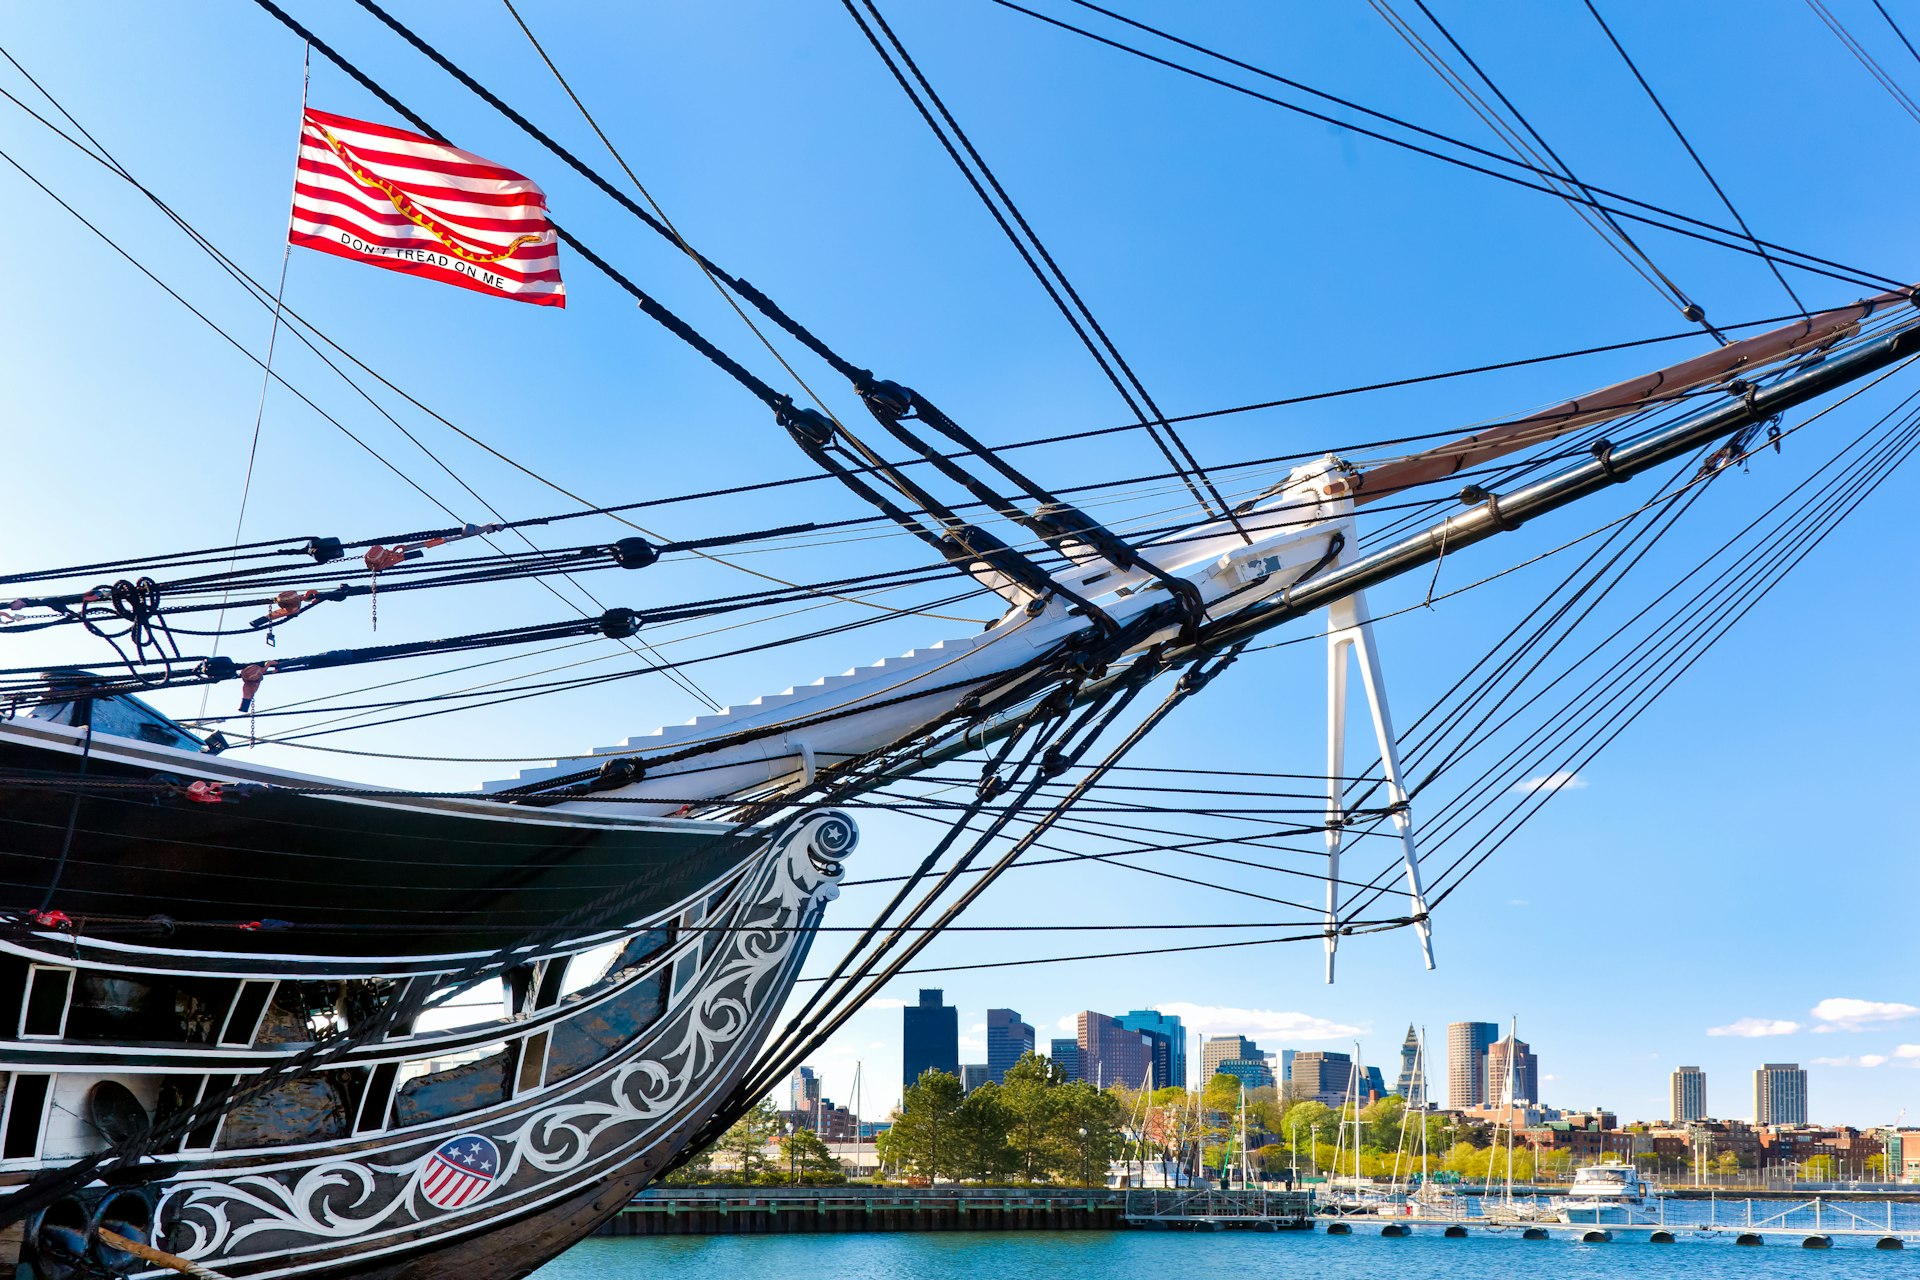 Boston skyline framed by the USS Constitution on a sunny day